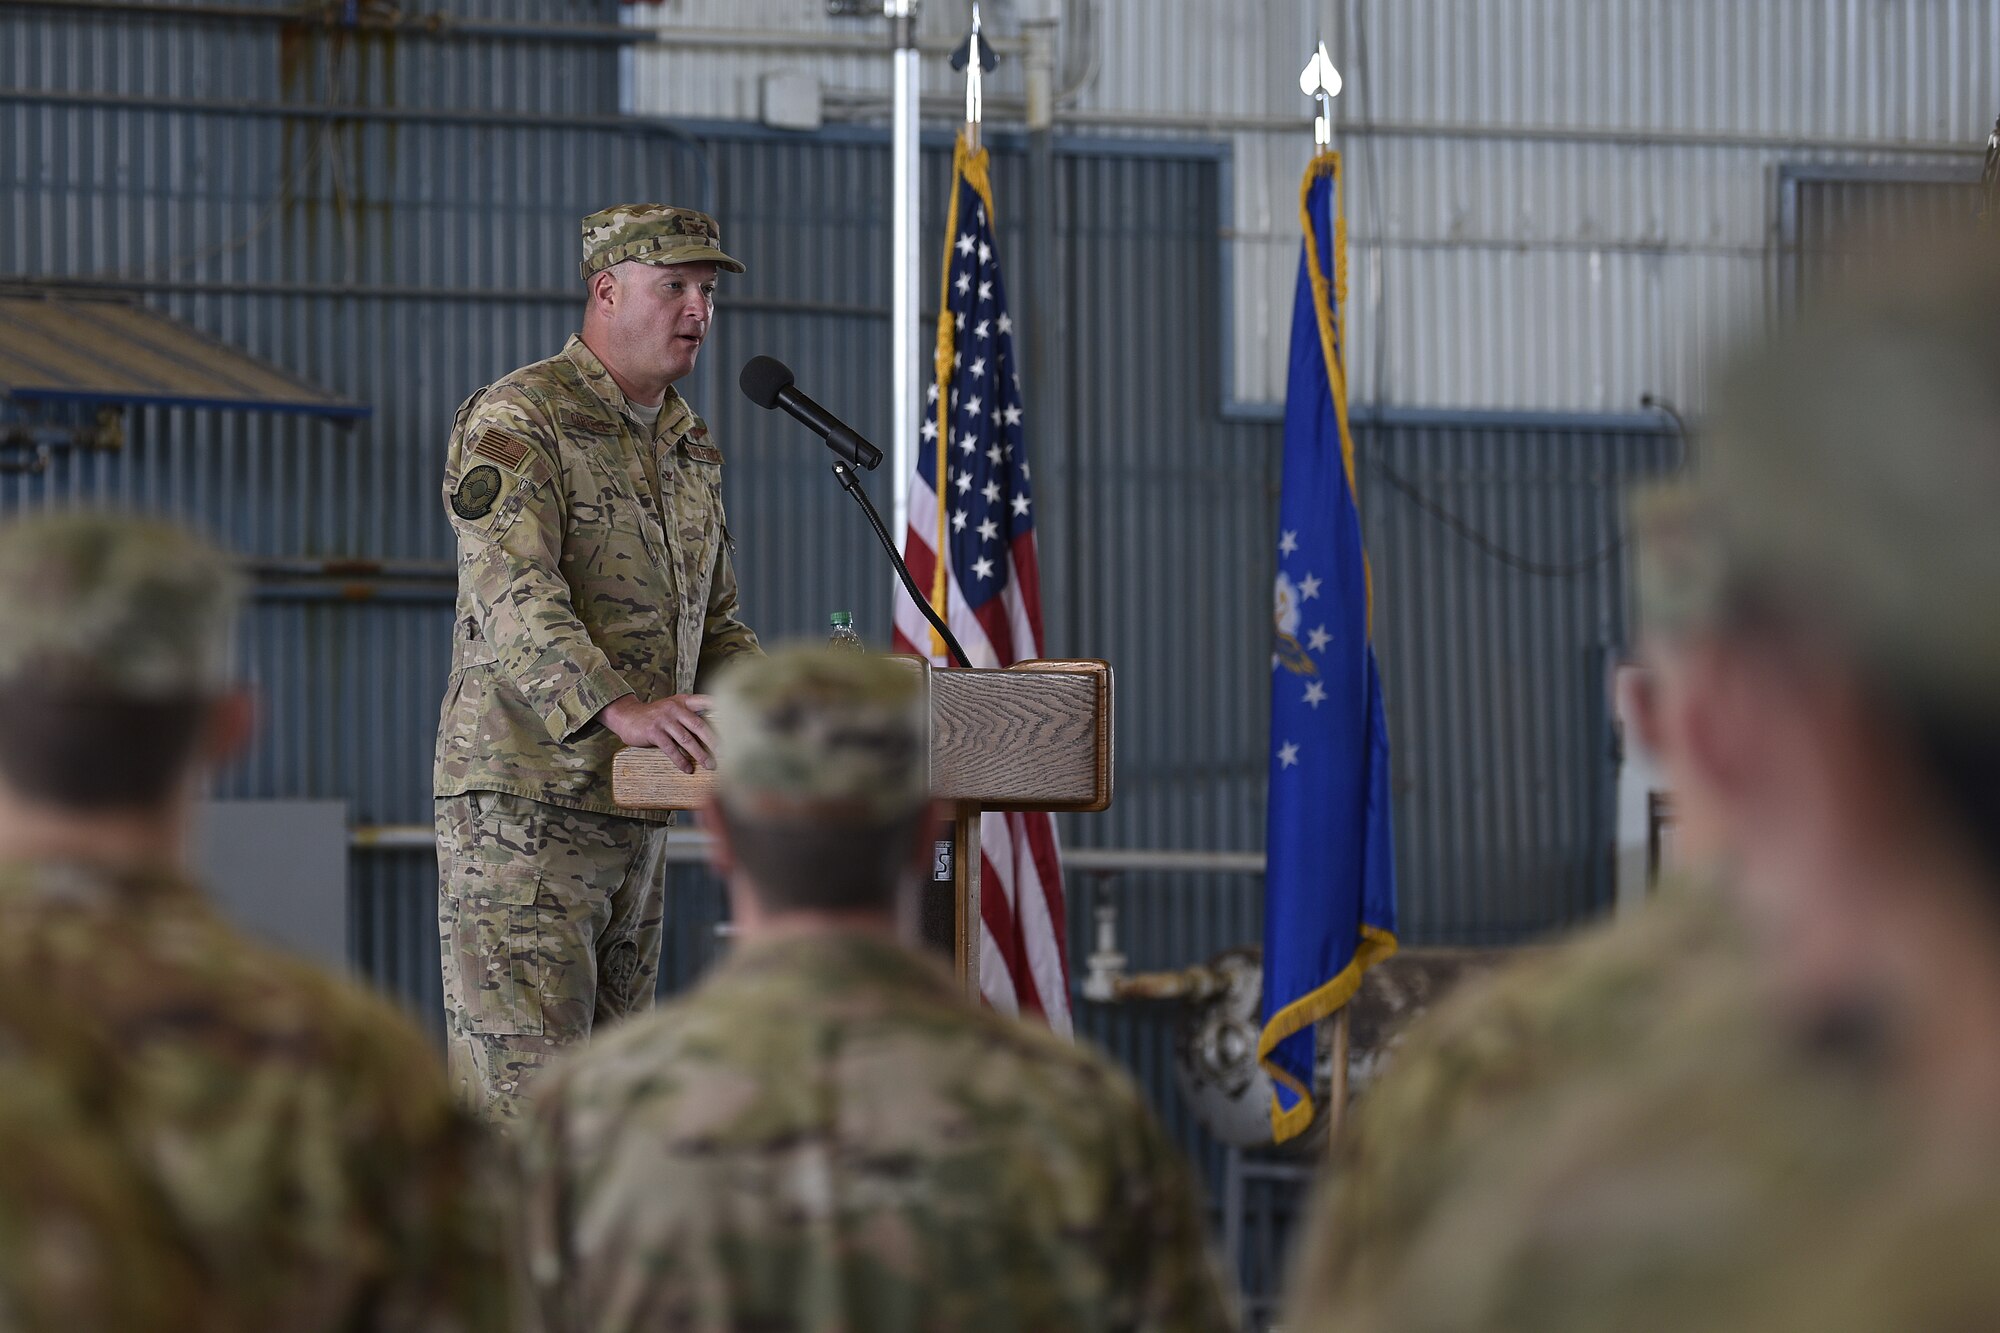 Col. Richard Carrell, 58th Operations Group commander, speaks to members of the 512th Rescue Squadron during the 512th RQS change of command ceremony at Kirtland Air Force Base, N.M., May 23, 2019. The mission of the 512 RQS is to prepare mission-ready aircrew for personnel recovery, nuclear enterprise security and support, and distinguished visitor airlift at operational units across the Air Force.  (U.S. Air Force photo by Airman 1st Class Austin J. Prisbrey)